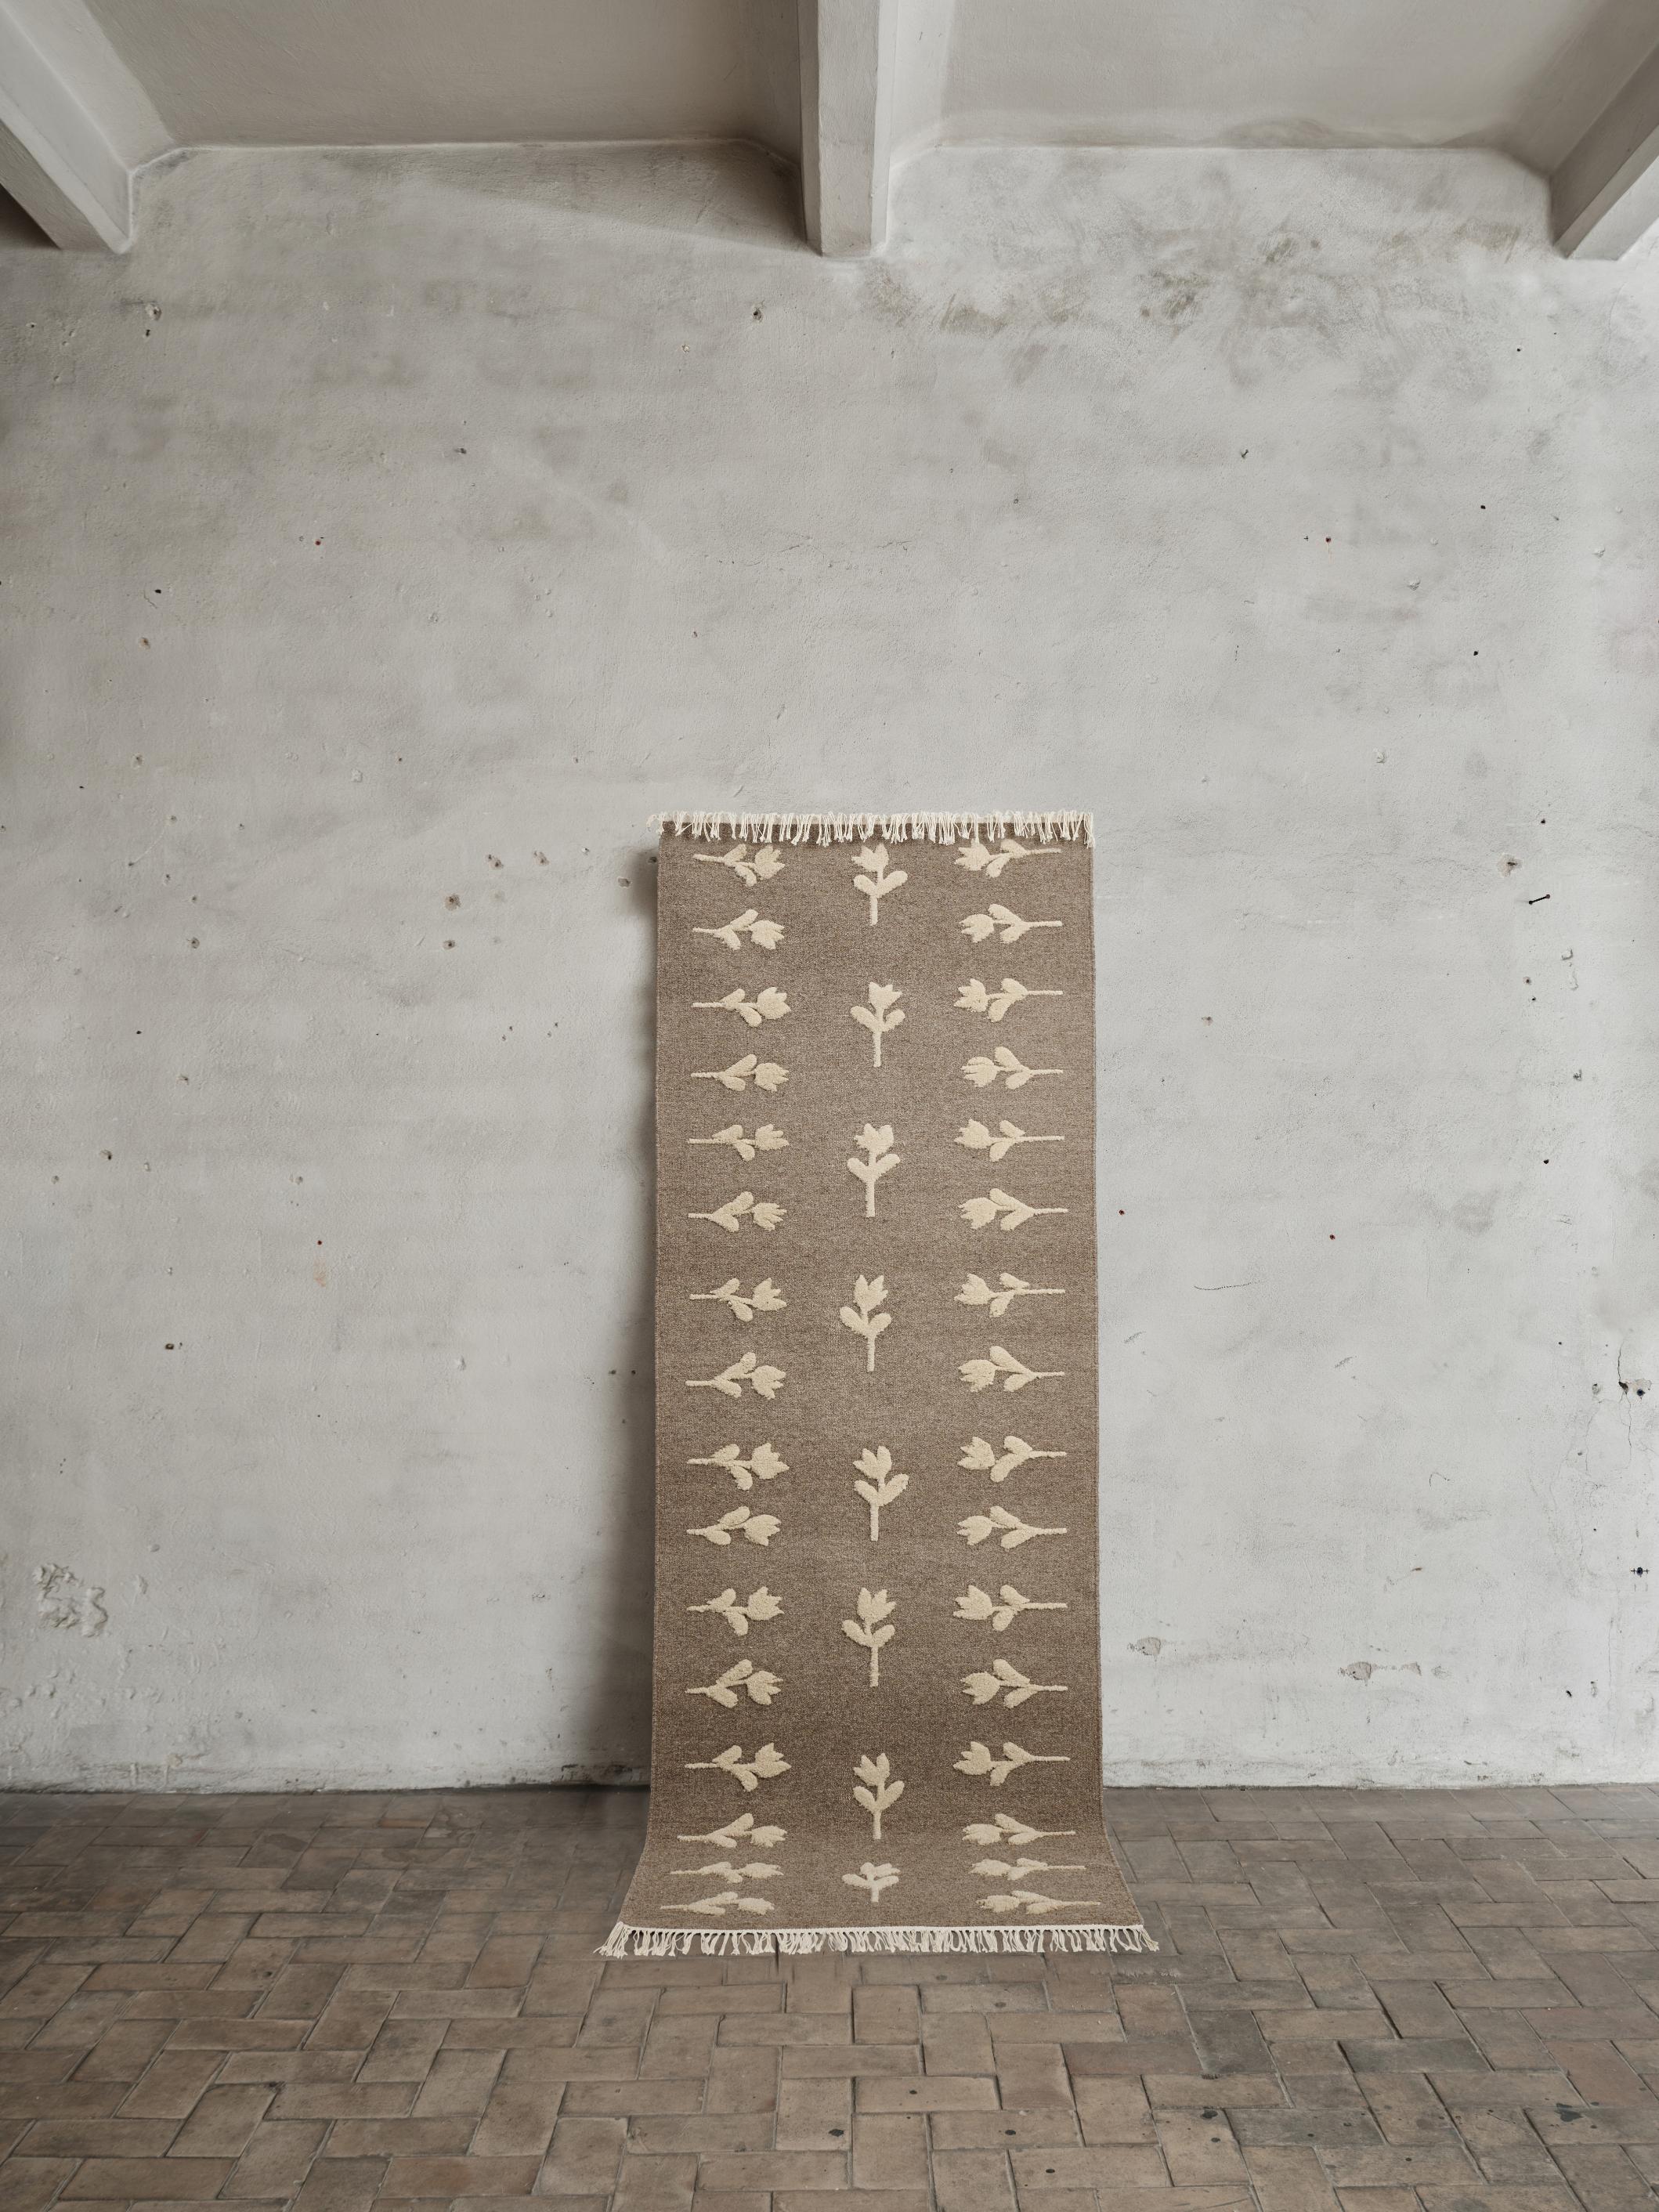 Colonnade no.09 Rug by Cappelen Dimyr
Dimensions: D 85 x H 240 cm
Materials: 85% Wool, 15% cotton

Colonnade no.09 & Rug no.18 is a grey-brown flat-woven rug with light beige hand-knotted floral pattern which gives a slightly high-and low effect,